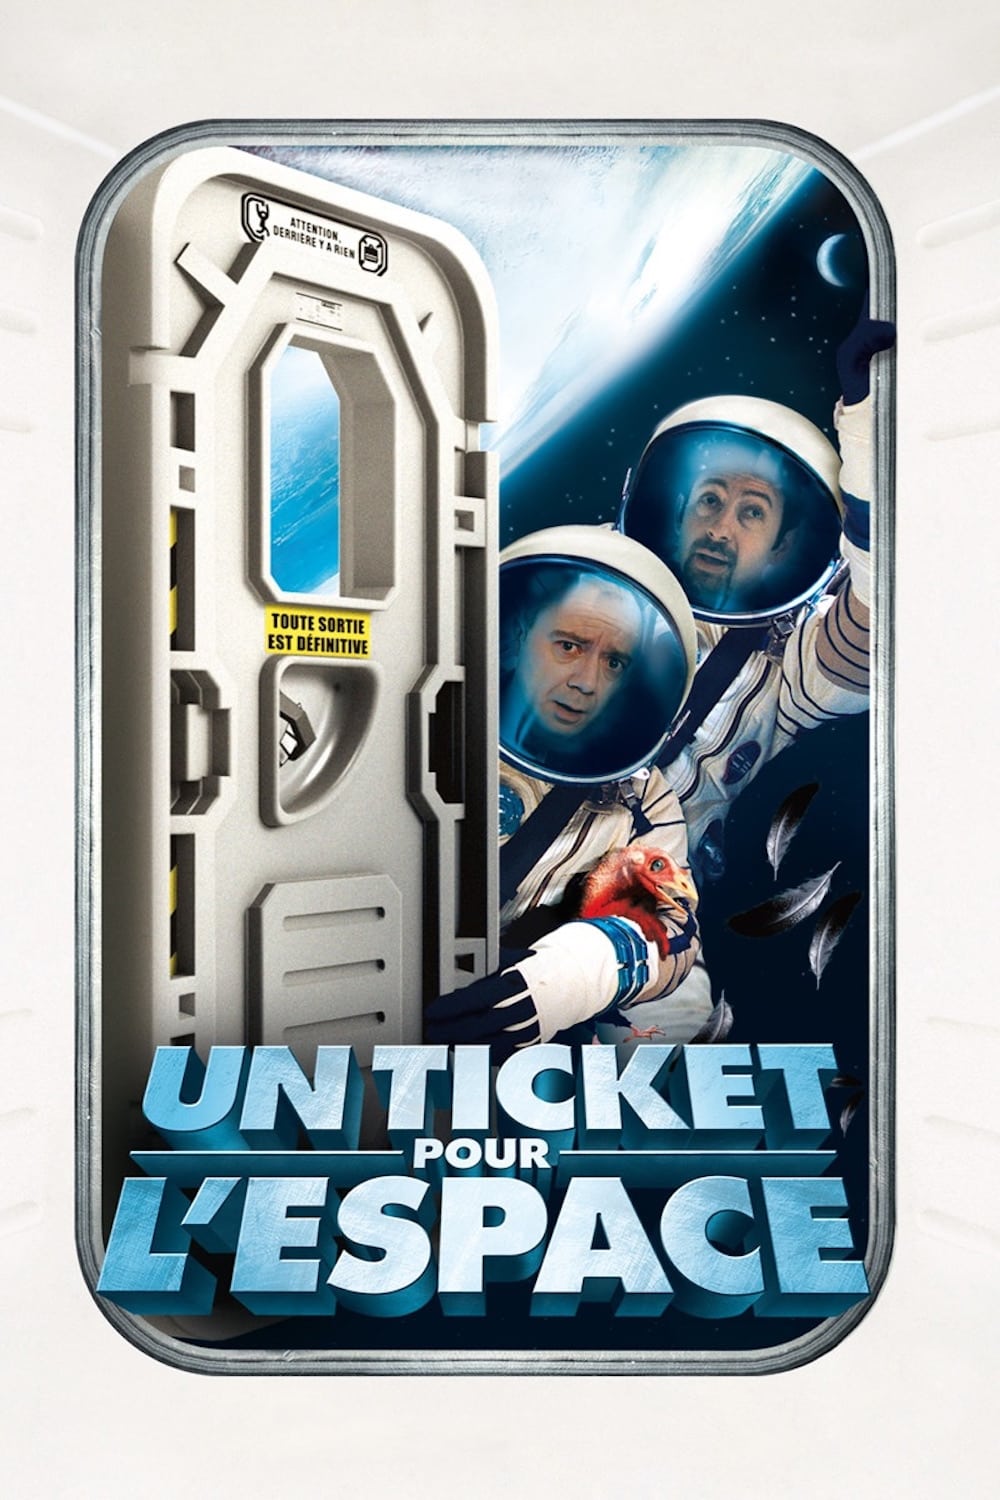 A Ticket to Space (2006)